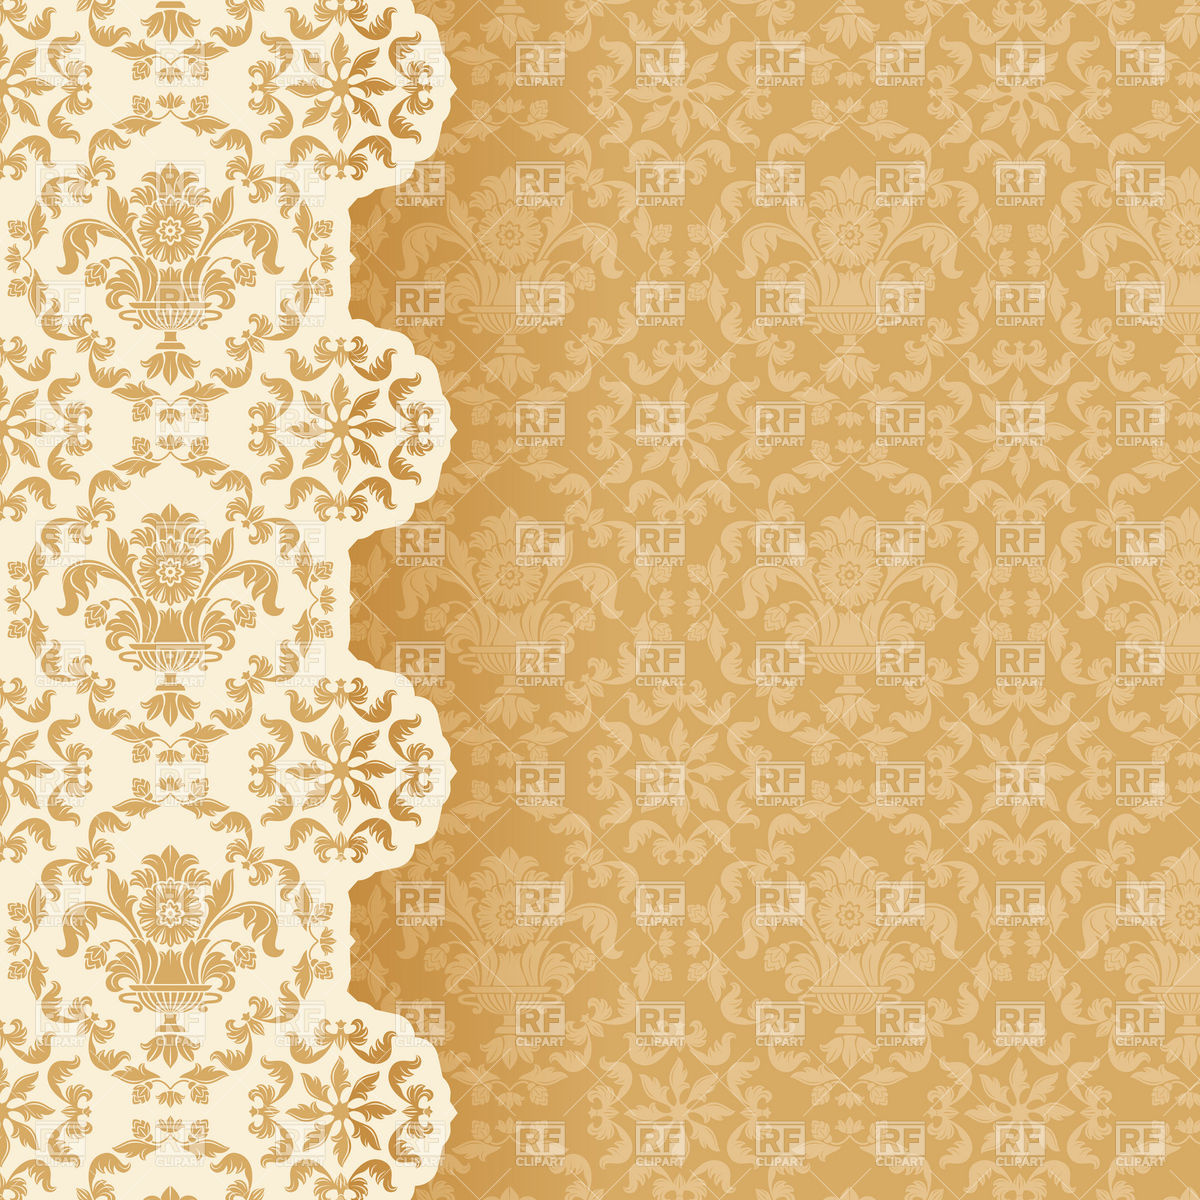 Victorian style wallpaper background 18880 Backgrounds Textures